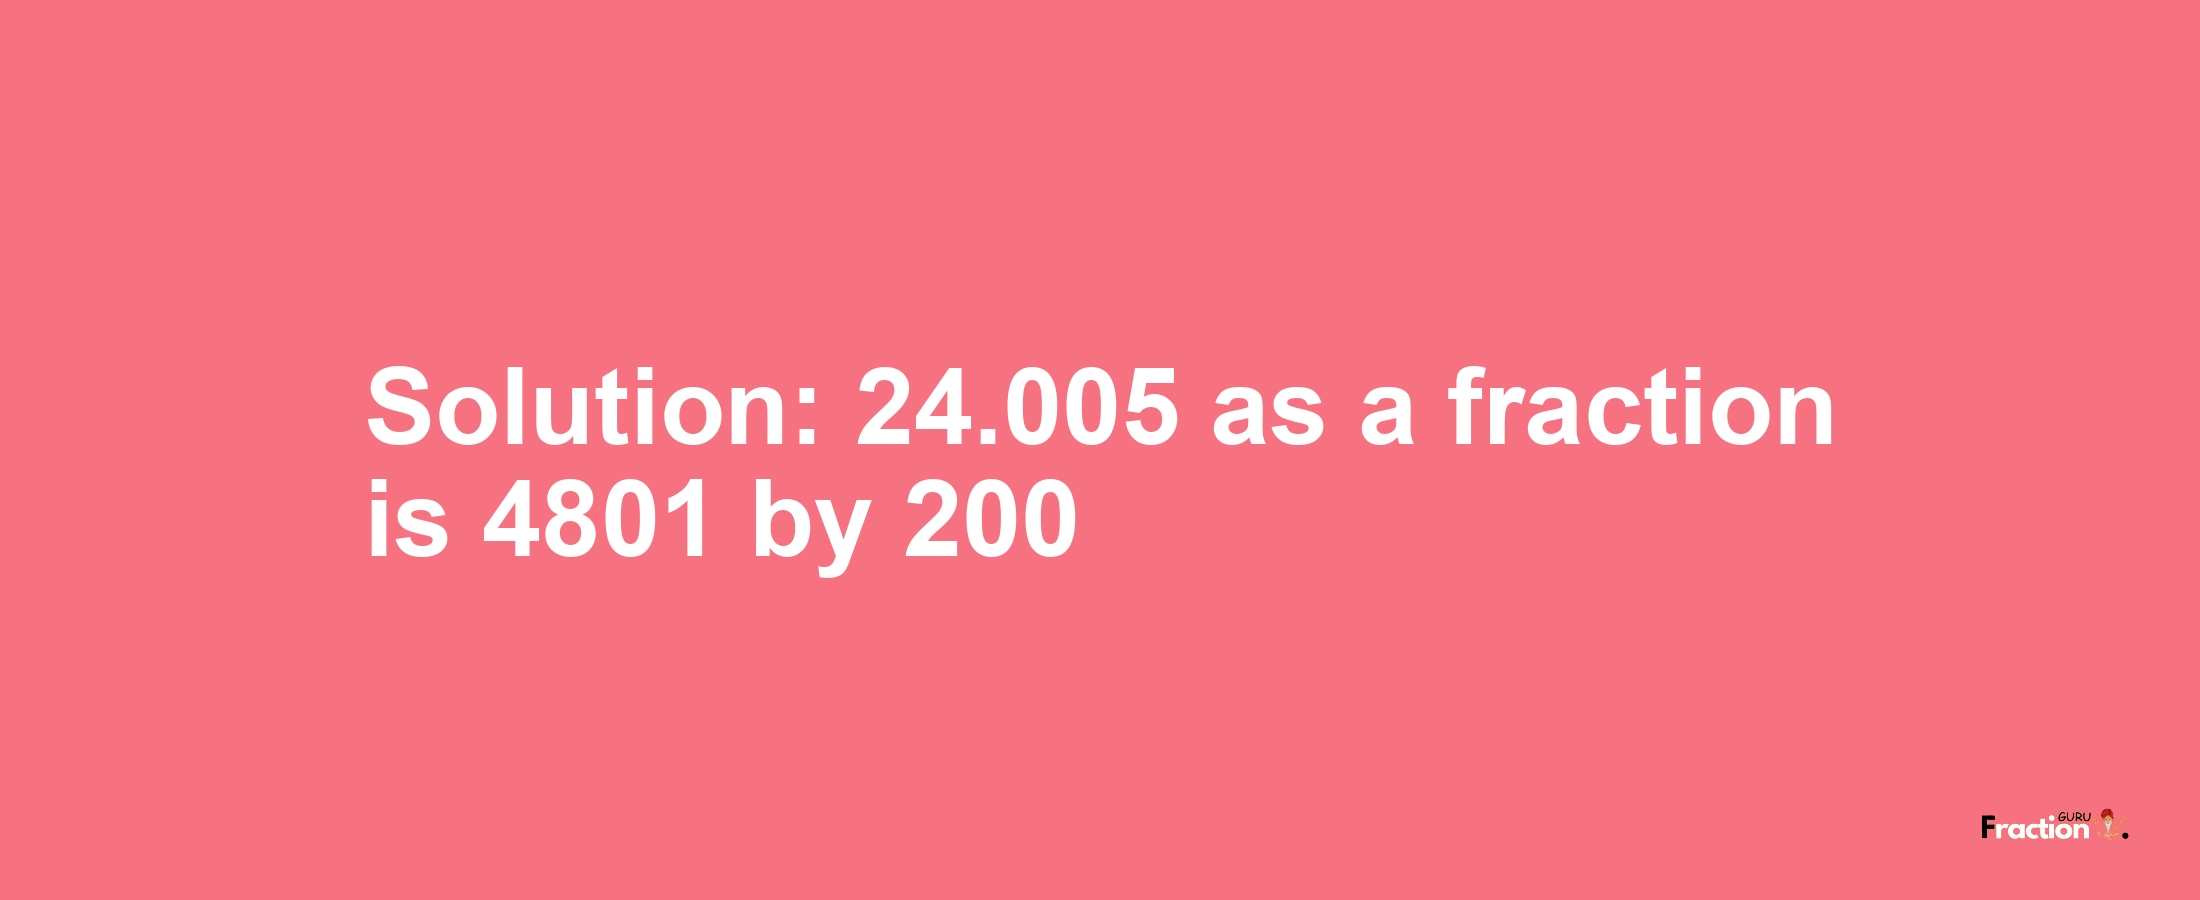 Solution:24.005 as a fraction is 4801/200